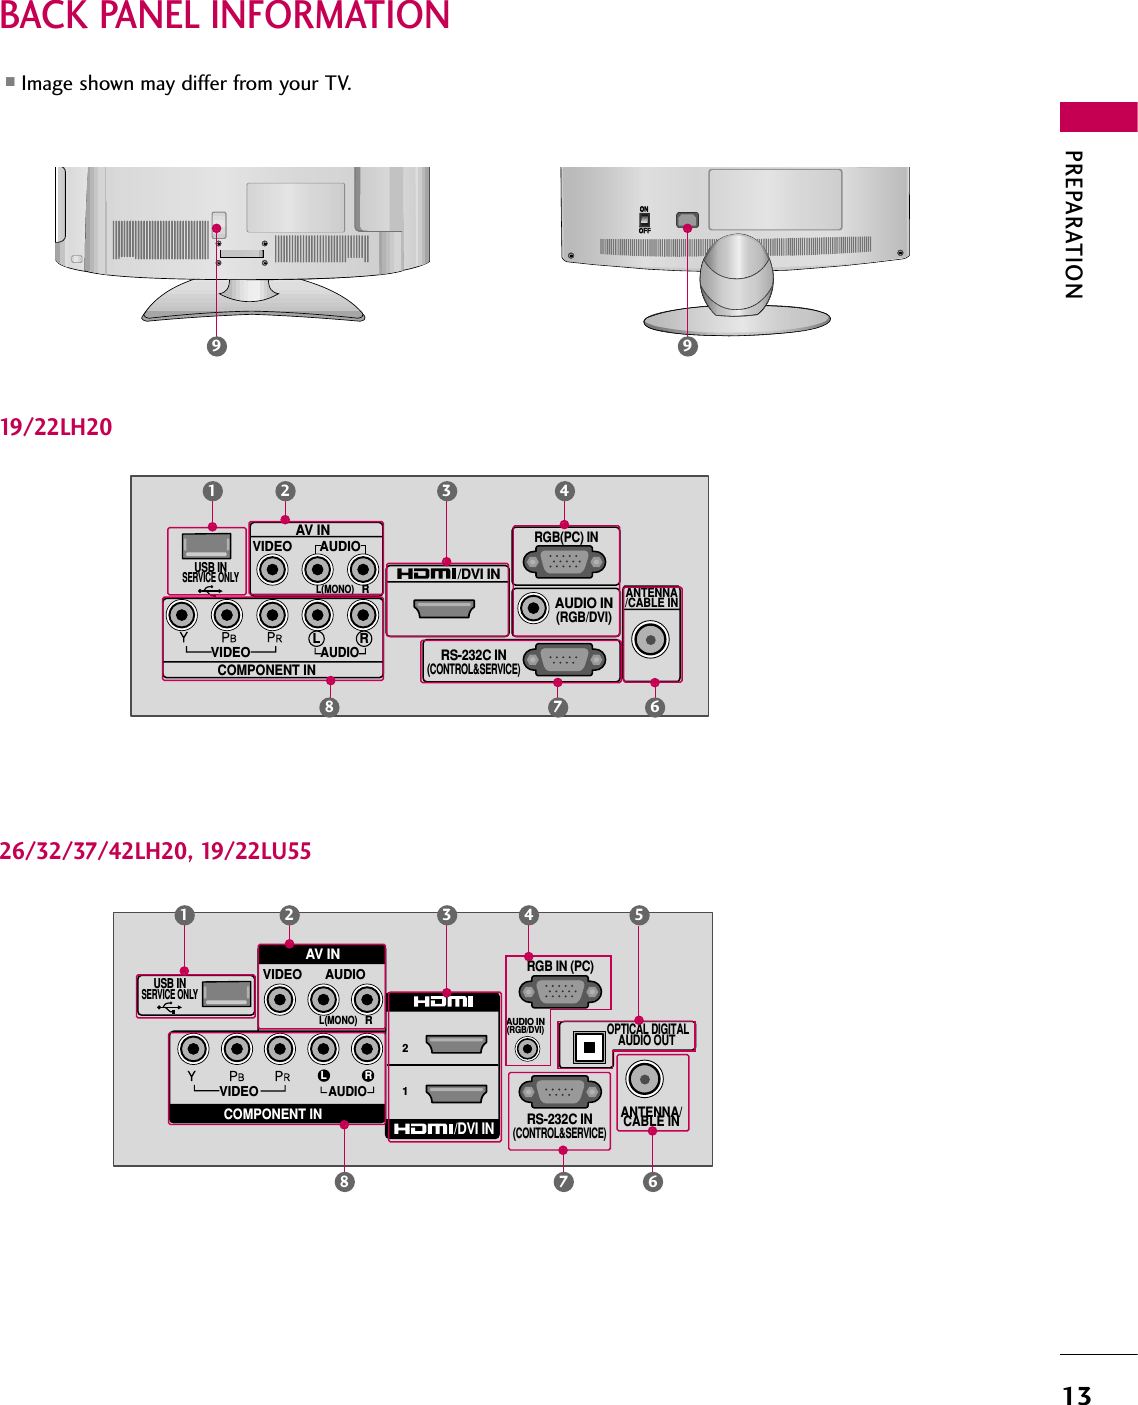 PREPARATION13BACK PANEL INFORMATIONRS-232C IN(CONTROL&amp;SERVICE)AUDIO IN(RGB/DVI)ANTENNA/CABLE INVIDEOAUDIOL RRGB(PC) IN/DVI INAV INVIDEO AUDIOL(MONO)RCOMPONENT INUSB INSERVICE ONLY21 43USB INSERVICE ONLYRS-232C IN(CONTROL&amp;SERVICE)AUDIO IN(RGB/DVI)ANTENNA/CABLE INVIDEOAUDIORGB IN (PC)VIDEO AUDIOL(MONO)R21L ROPTICAL DIGITALAUDIO OUT /DVI INCOMPONENT INAV IN21326/32/37/42LH20, 19/22LU5519/22LH20457 687 689❖◆❖◆❖❋❋❖❋❋9■Image shown may differ from your TV.